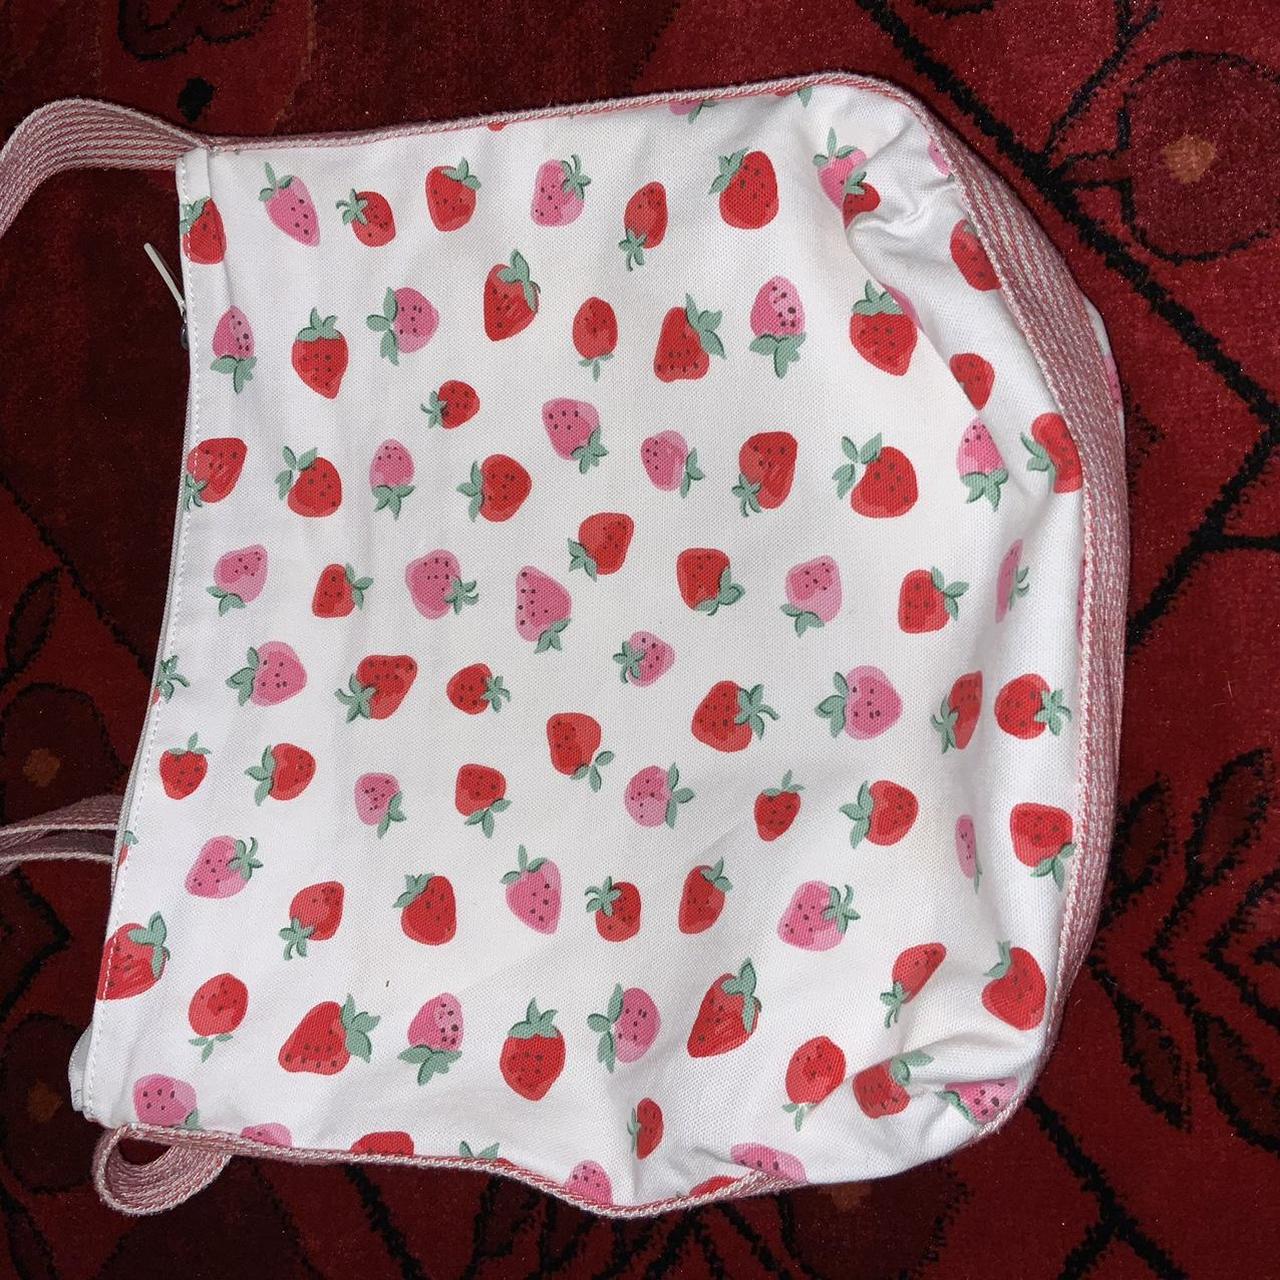 Cath Kidston Women's White and Pink Bag (2)